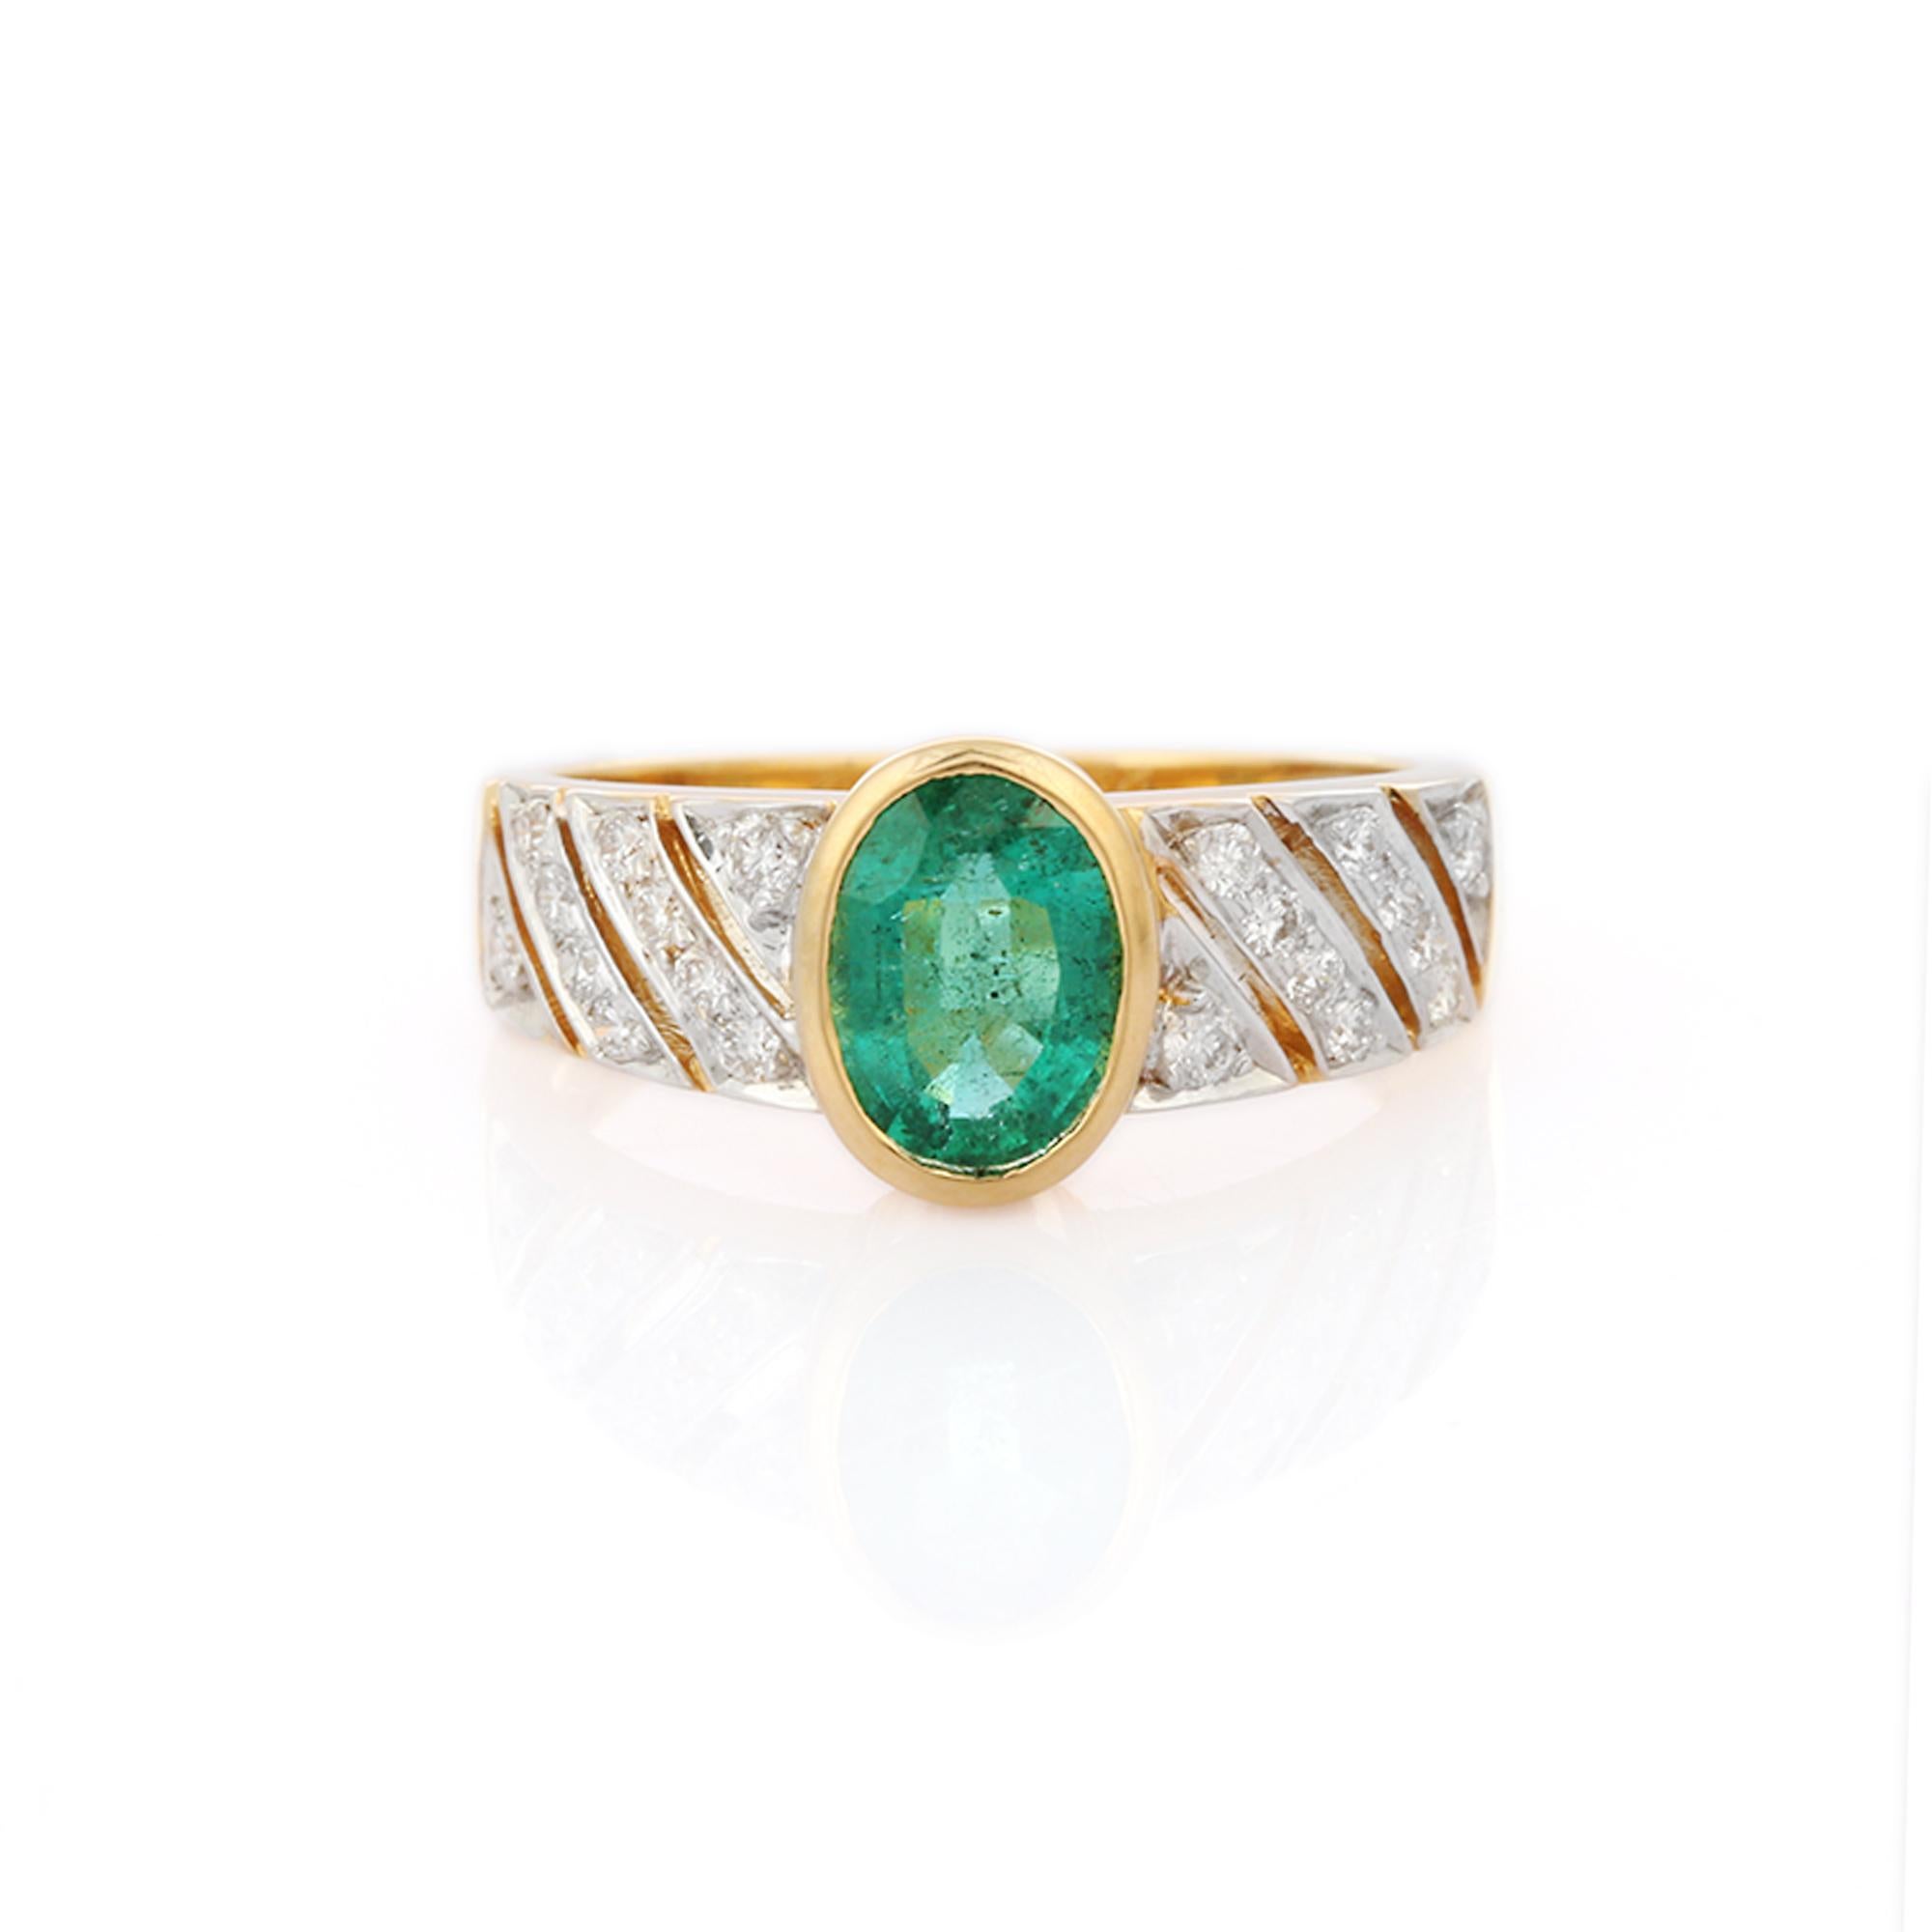 For Sale:  Exquisite 1.11 Ct Emerald Gemstone & Diamonds Engagement Ring in 18K Yellow Gold 5